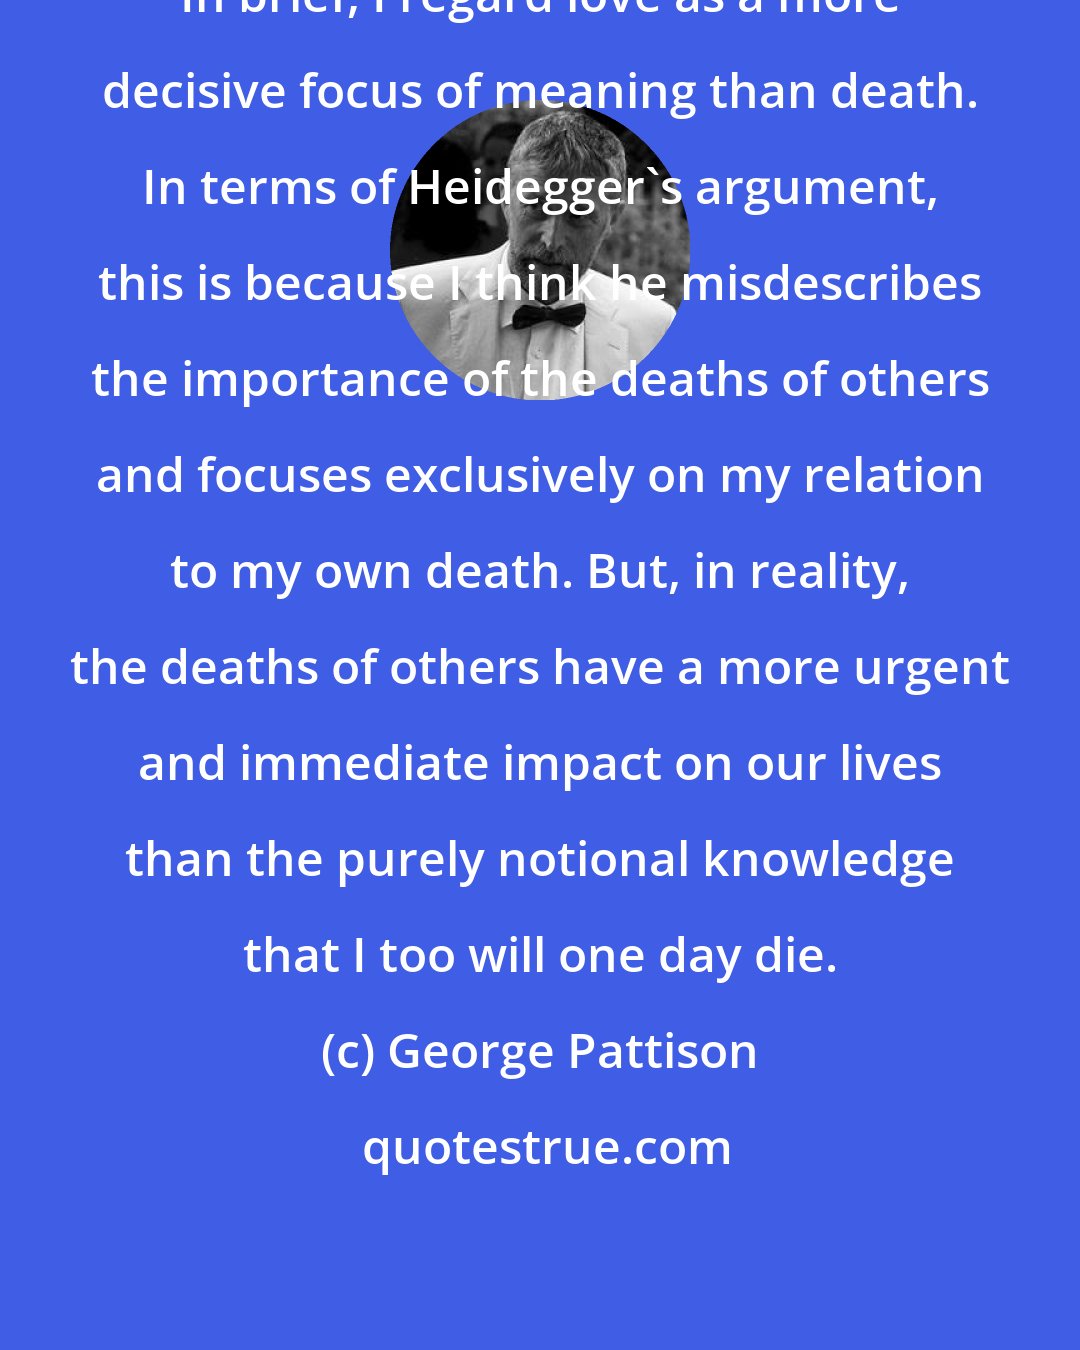 George Pattison: In brief, I regard love as a more decisive focus of meaning than death. In terms of Heidegger's argument, this is because I think he misdescribes the importance of the deaths of others and focuses exclusively on my relation to my own death. But, in reality, the deaths of others have a more urgent and immediate impact on our lives than the purely notional knowledge that I too will one day die.